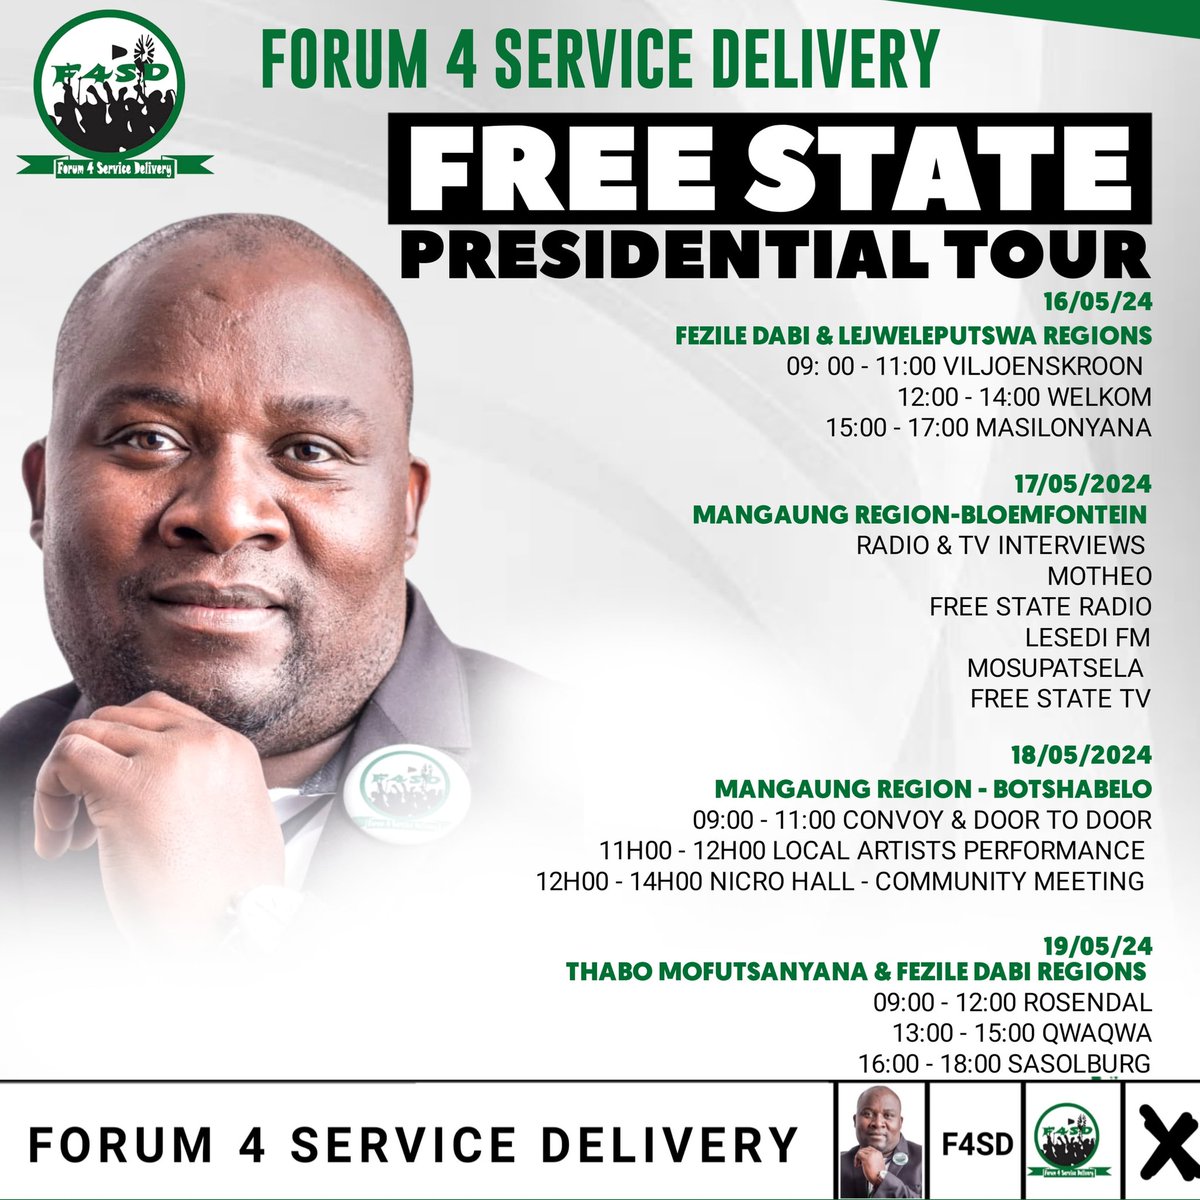 Mangaung Stand Up!!
F4SD Presidential Tour coming your way. Today!
#vote24 #vote2024 #Elections24